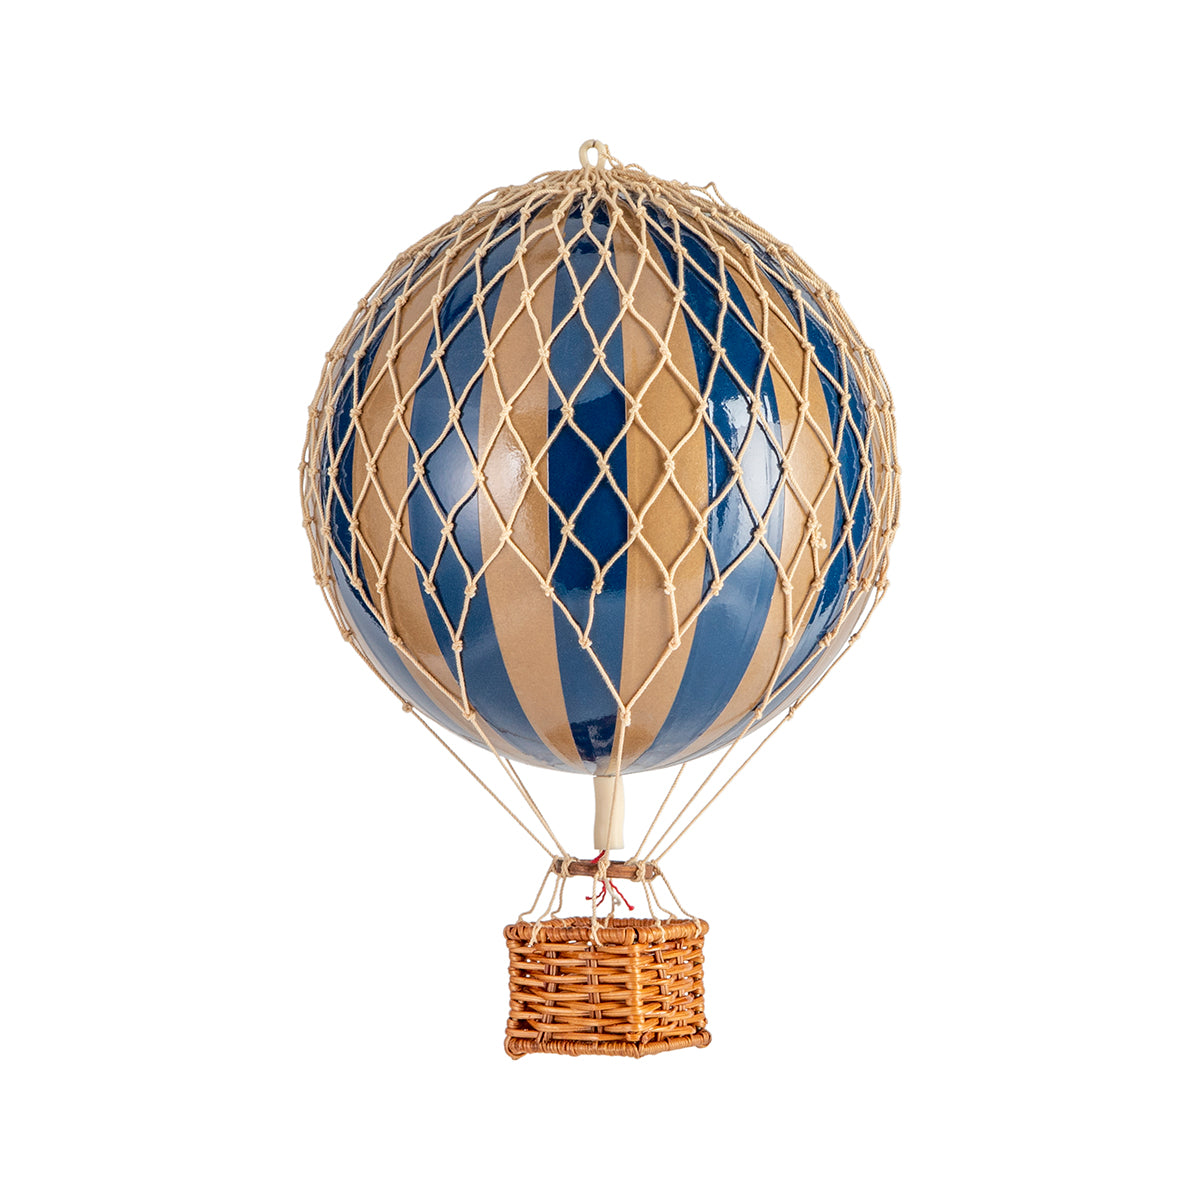 A quirky Wonderen Small Hot Air Balloon - Travels Light with a wicker basket, adorned in blue and brown.